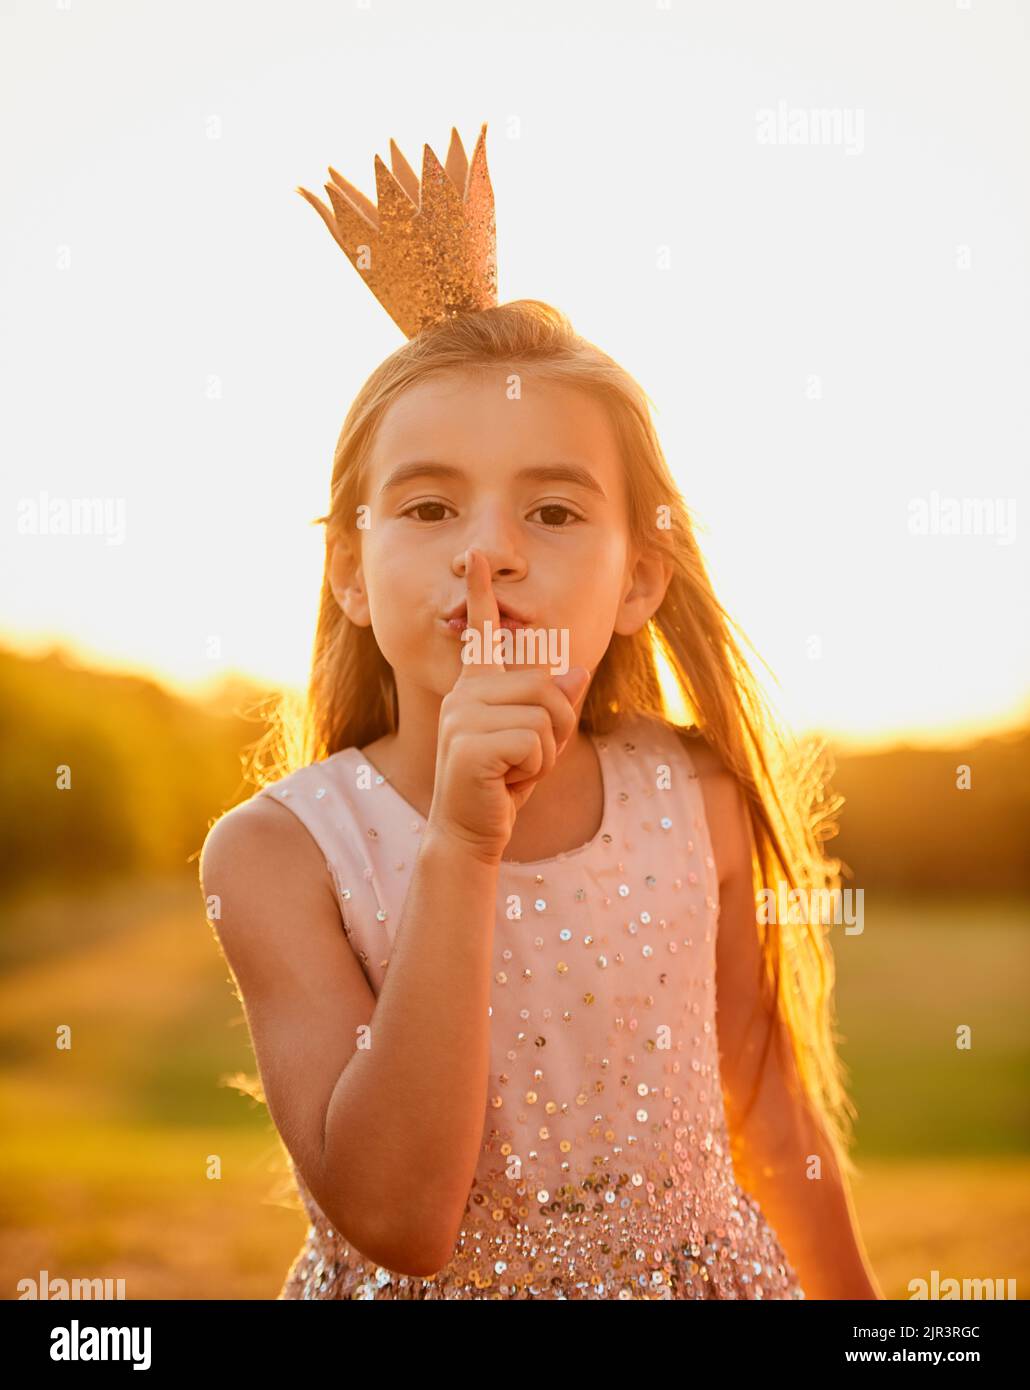 Sshh and listen to your imagination. an adorable little girl playing outdoors. Stock Photo